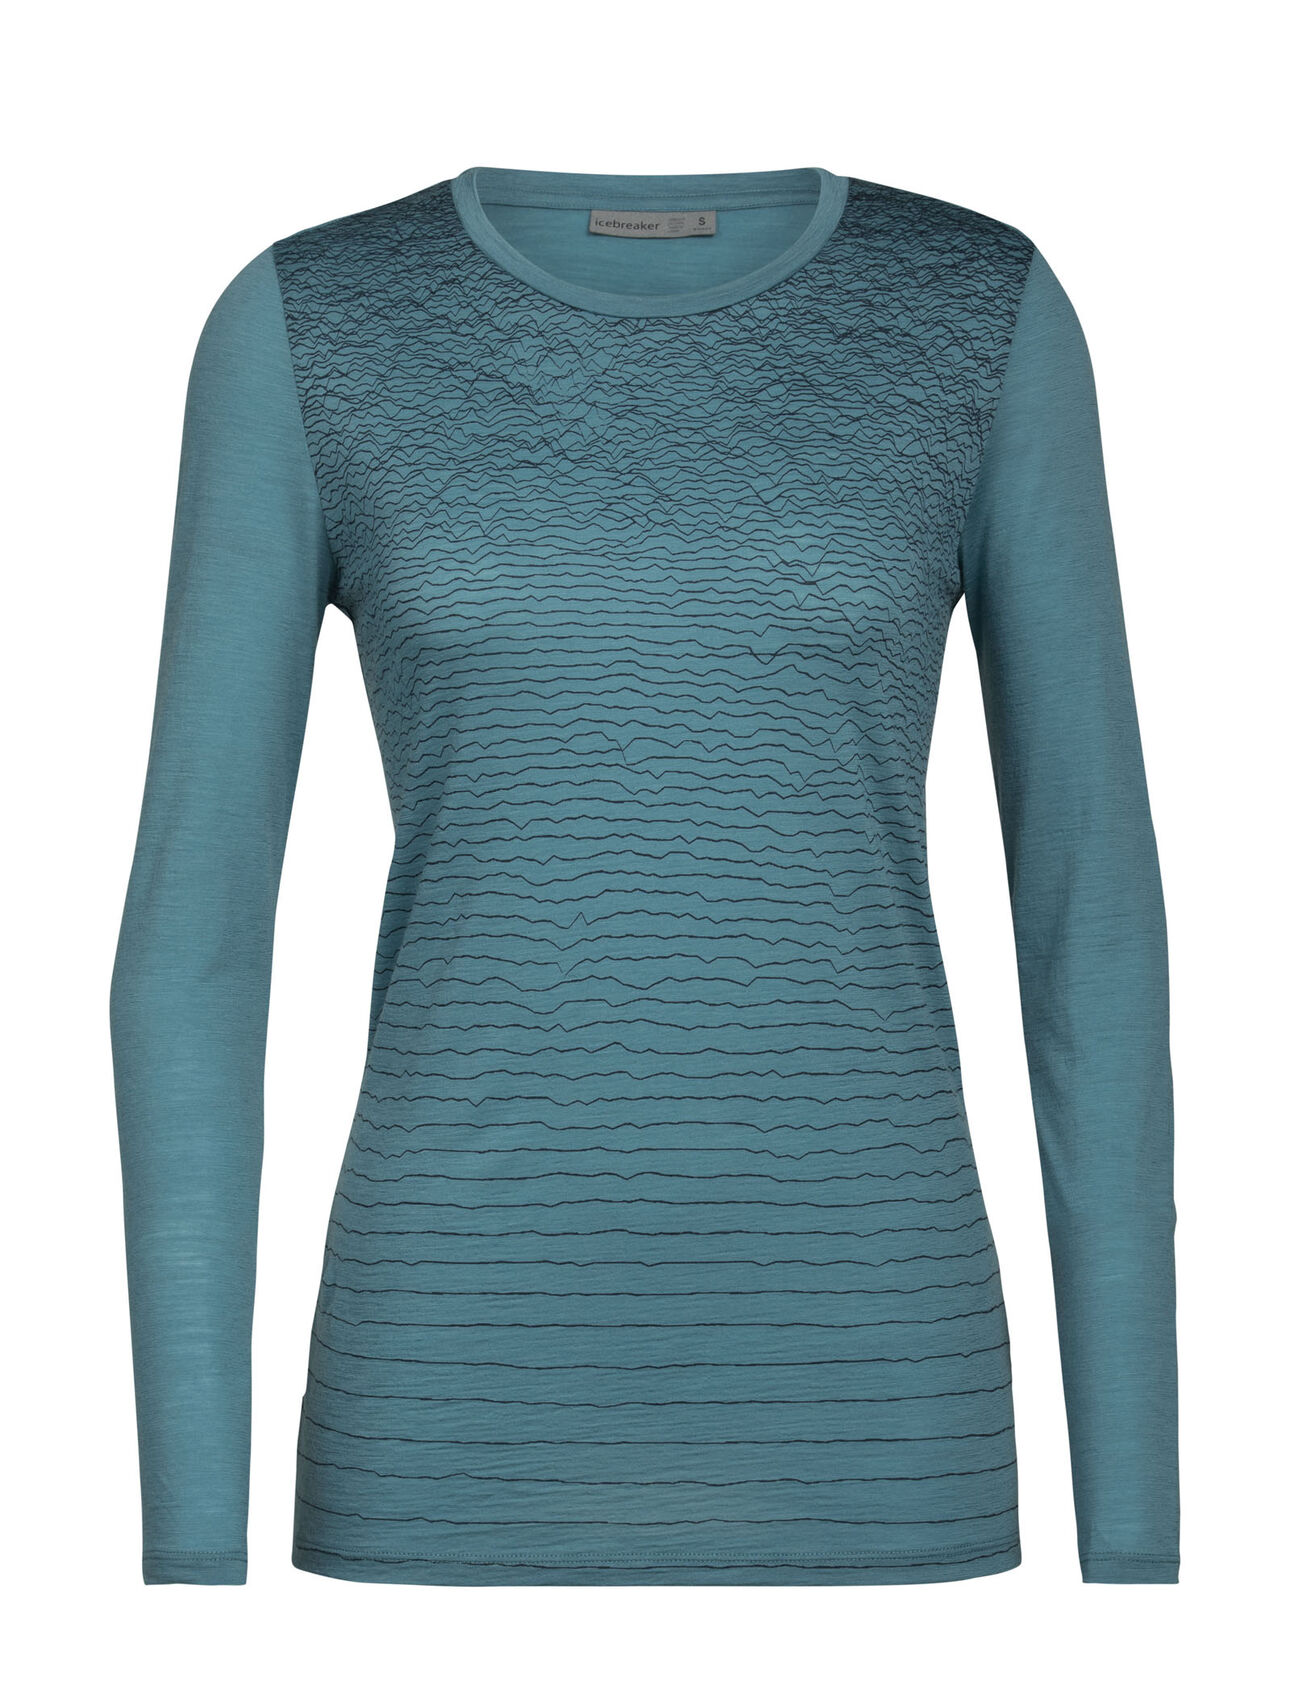 Womens Merino Spector Long Sleeve Crewe T-Shirt Landscape Lines A lightweight, breathable, and versatile merino wool T-shirt ideal for everything from hiking to travel, our Spector Long Sleeve Crewe Landscape Lines is a go-to for any and every day.